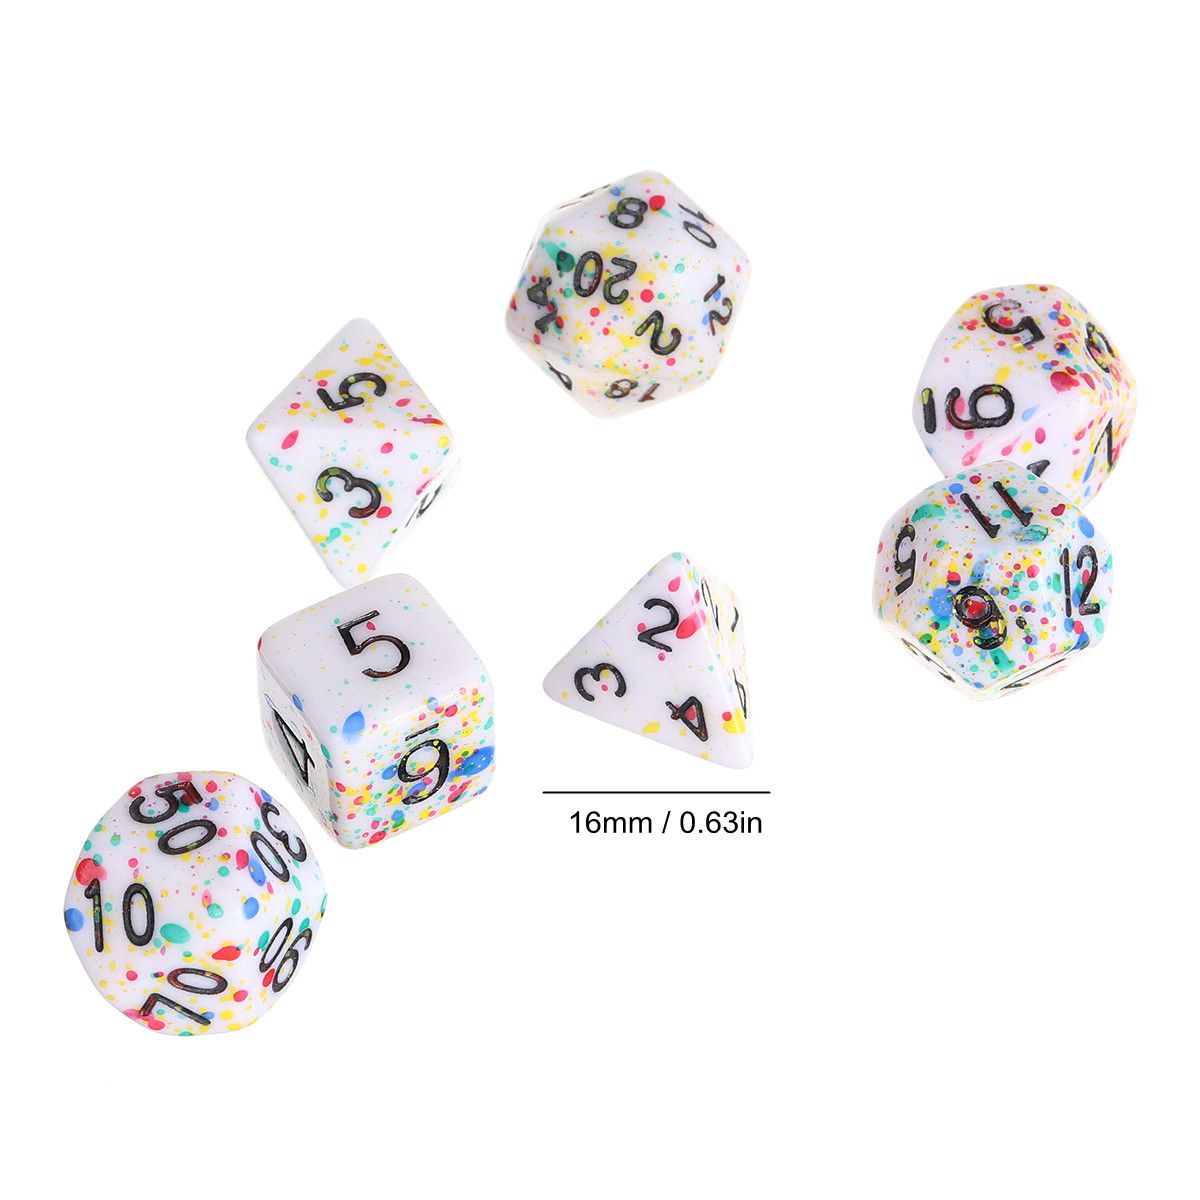 7Pcs-Acrylic-Polyhedral-Dice-Set-Colorful-Board-Game-Multisided-Dices-Gadget-1690588